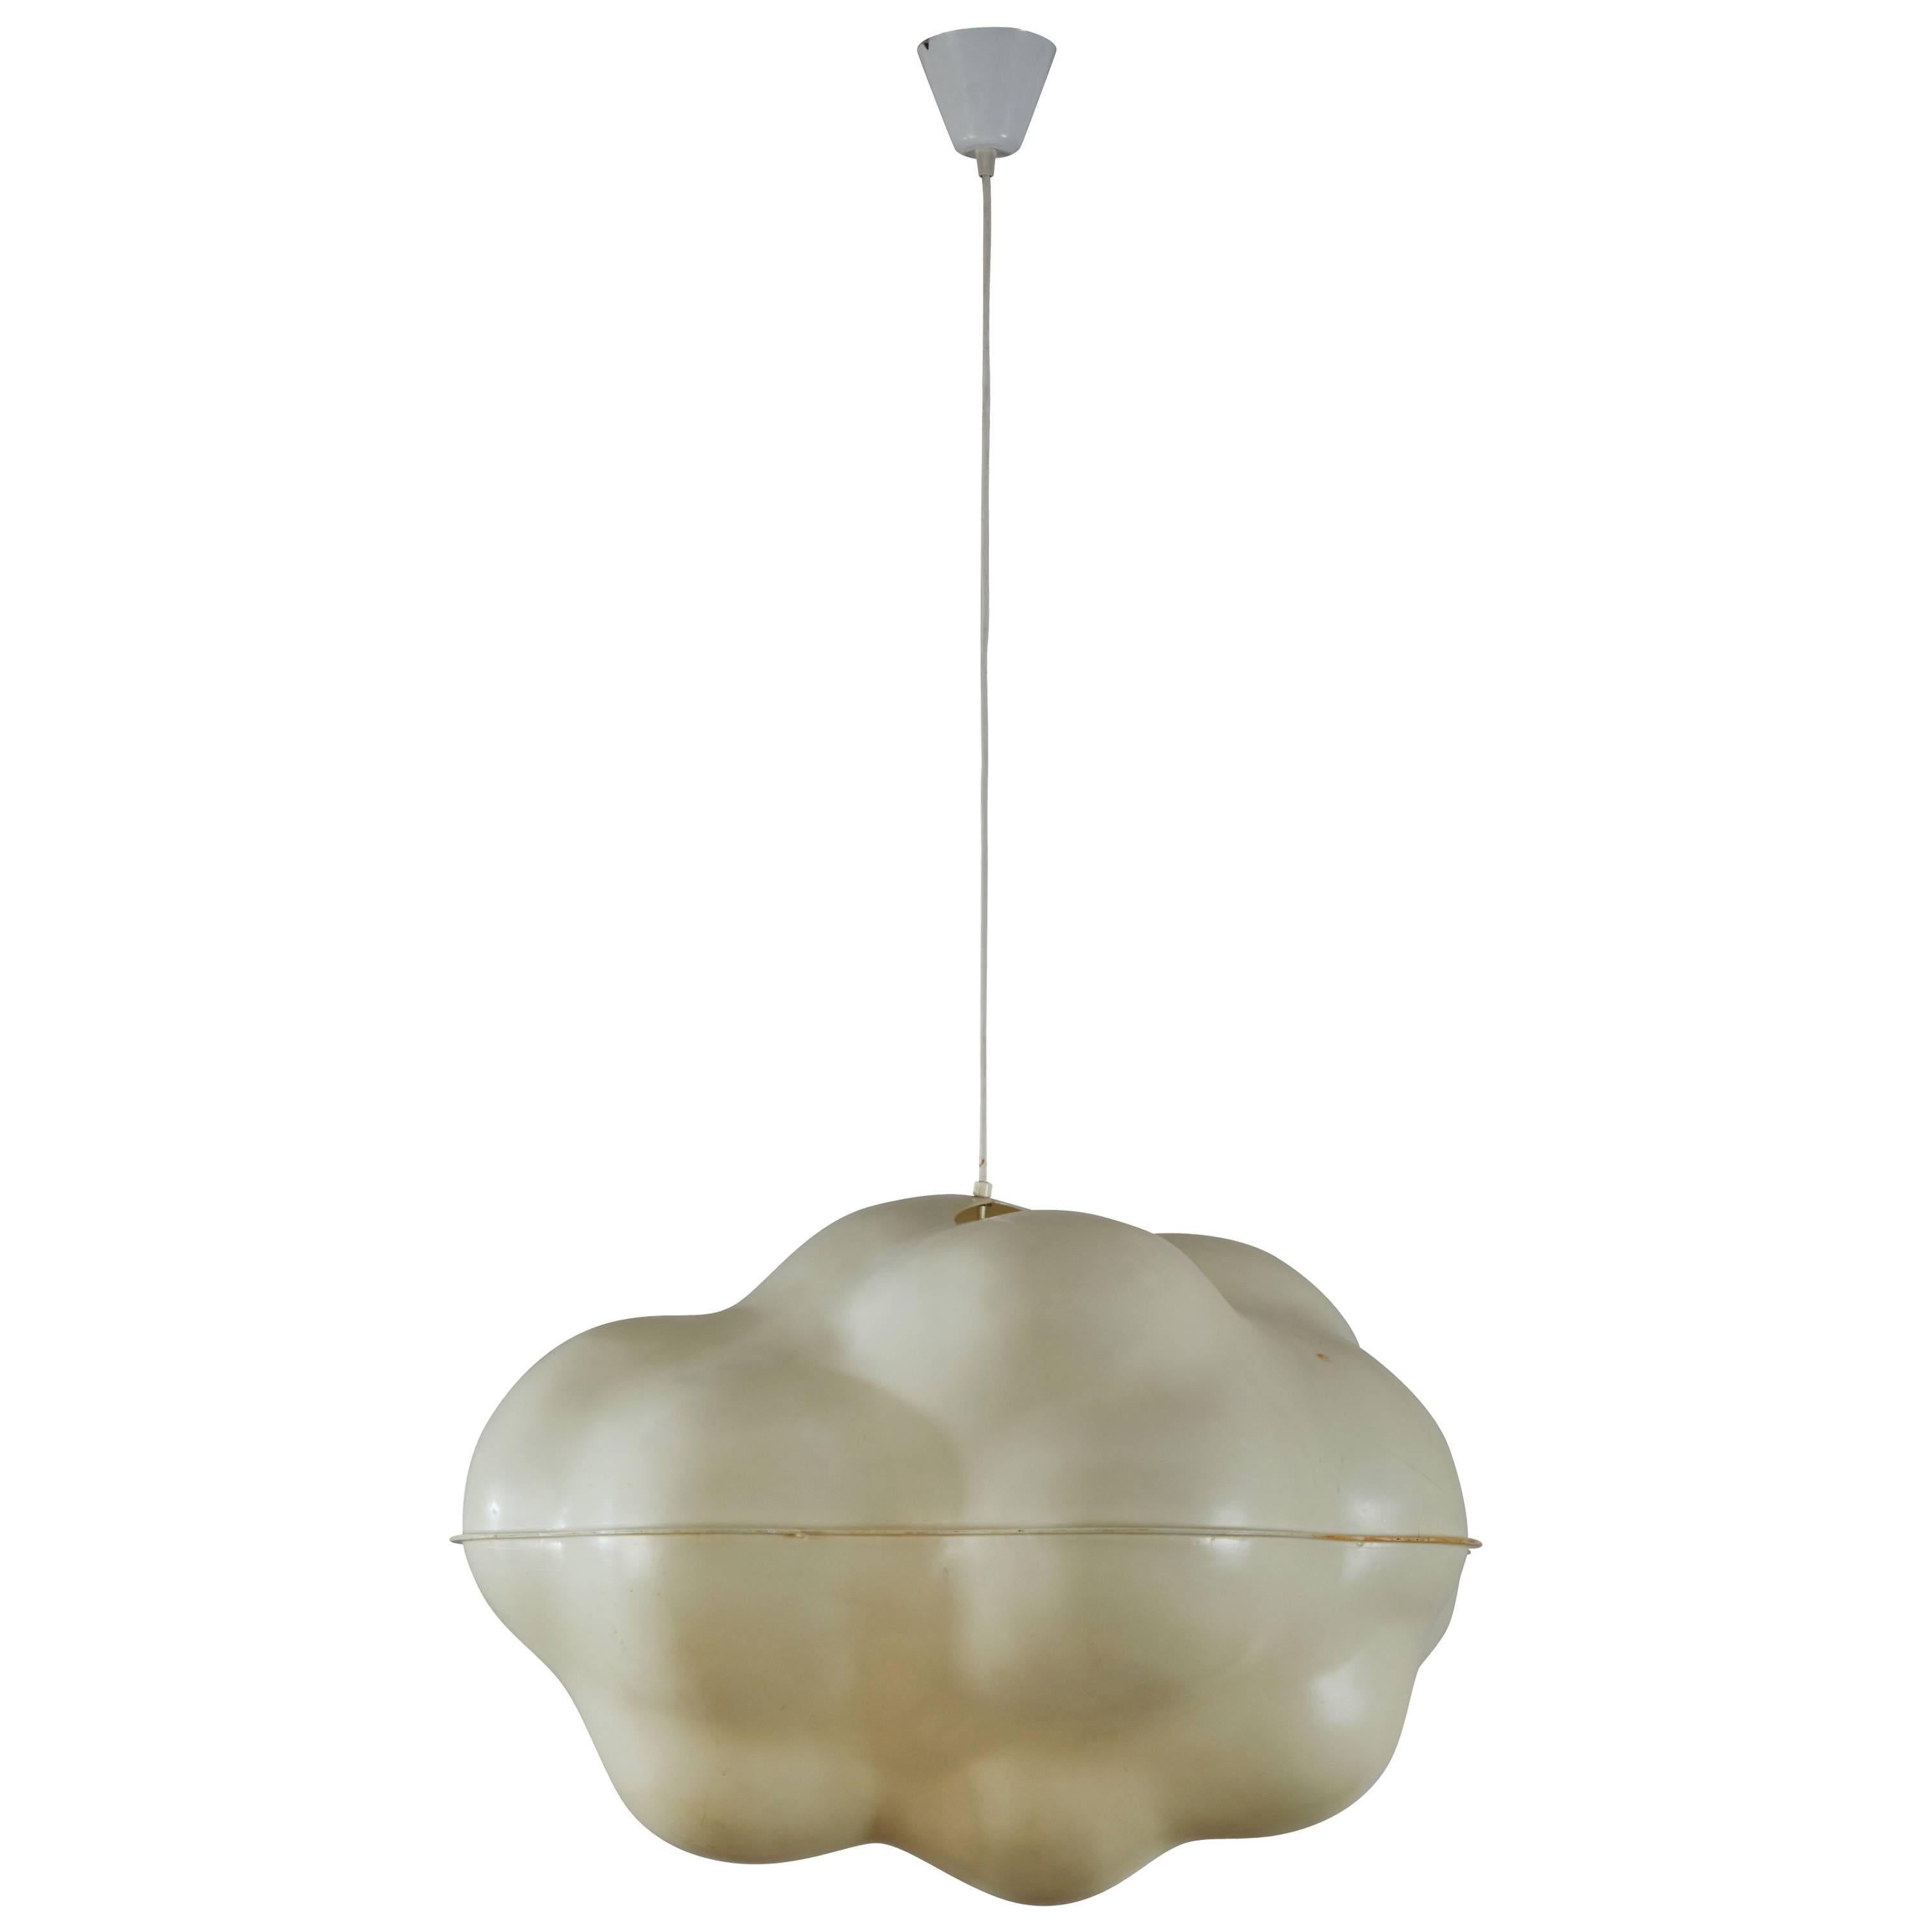 Hanging Cloud Light by Susi and Ueli Berger for J. Lüber